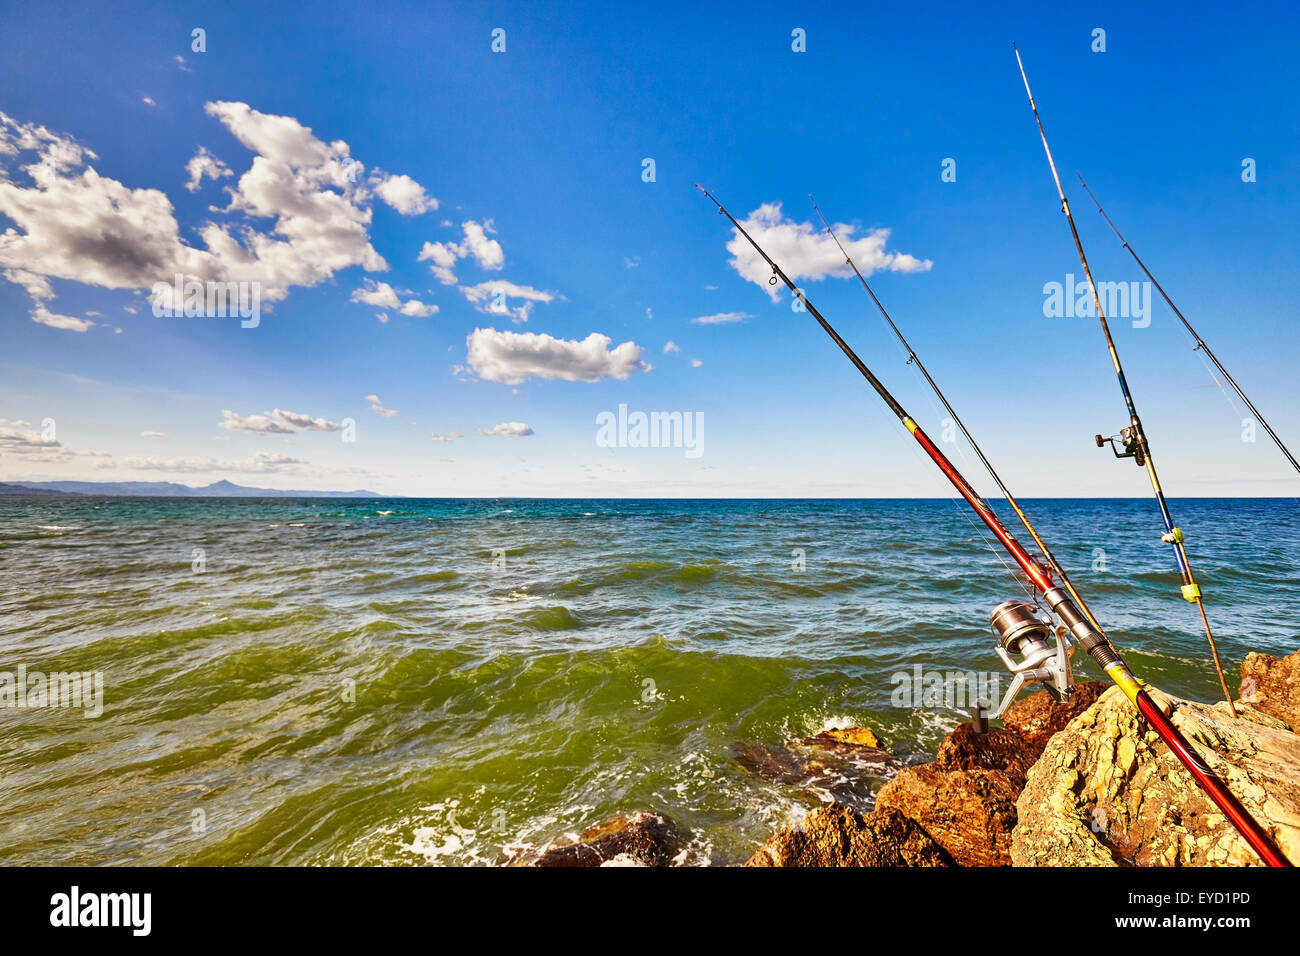 BEMIDJI, MN - 29 JUL 2019: Rack with Many Fishing Rods in Retail Store  Editorial Stock Photo - Image of fish, line: 154643043